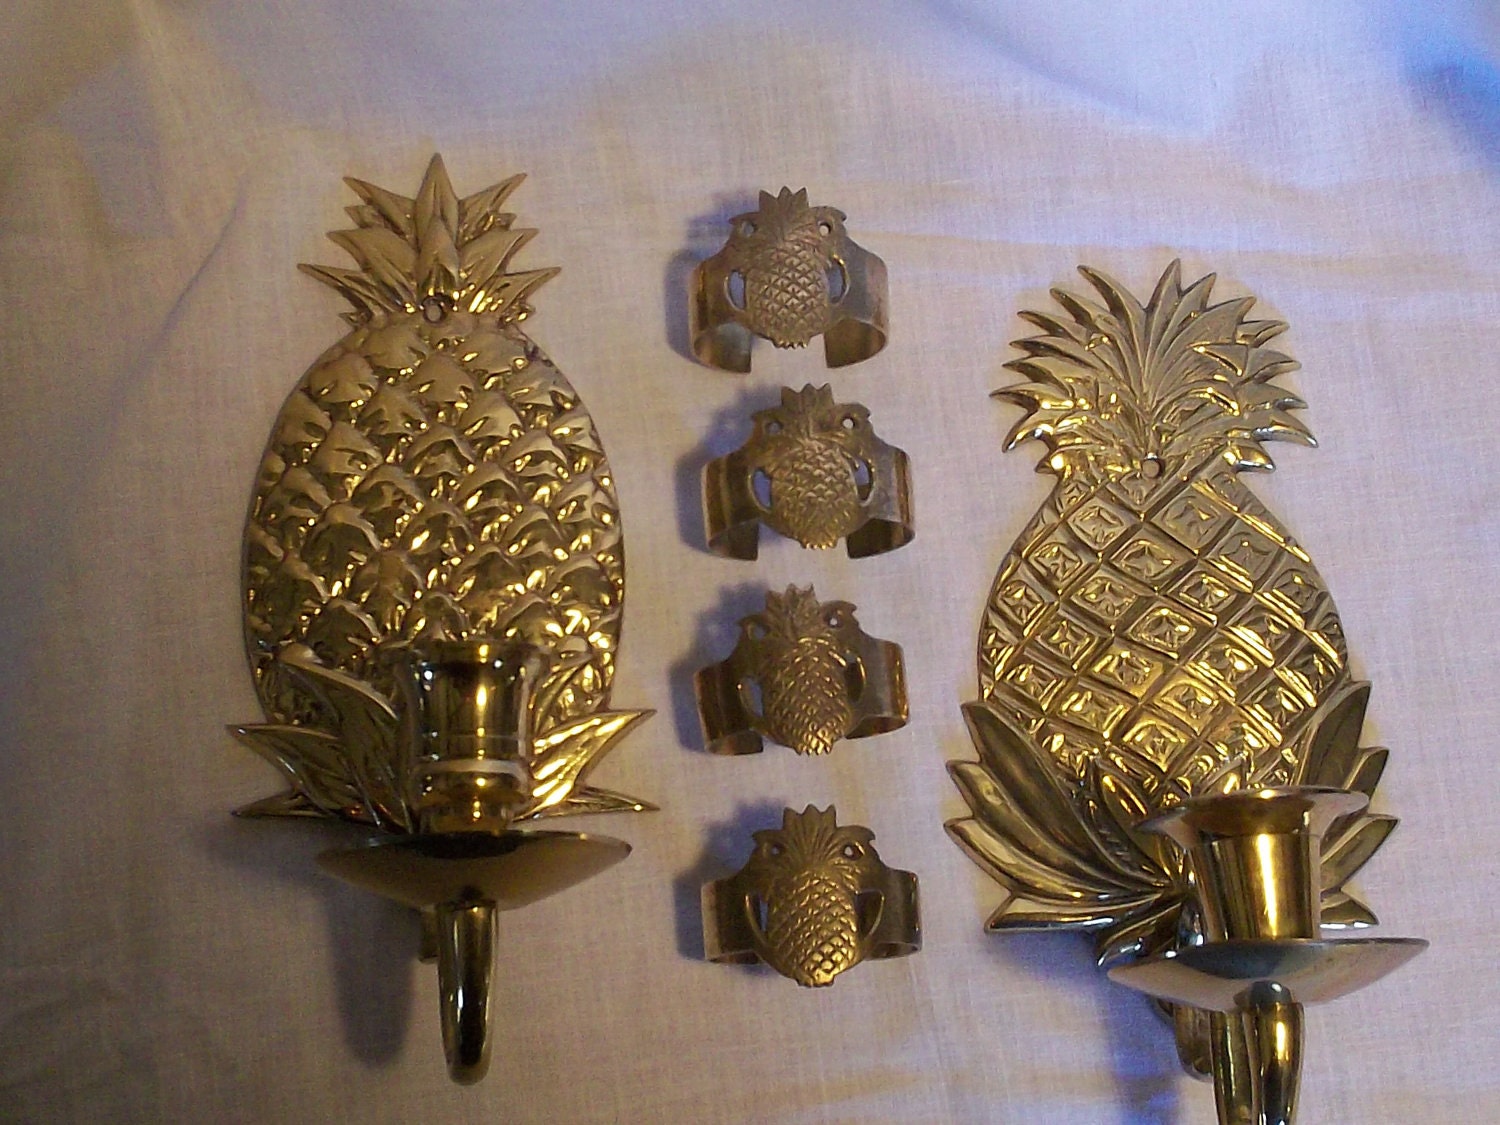 Pair of Vintage Brass Pineapple Decor Wall Sconces